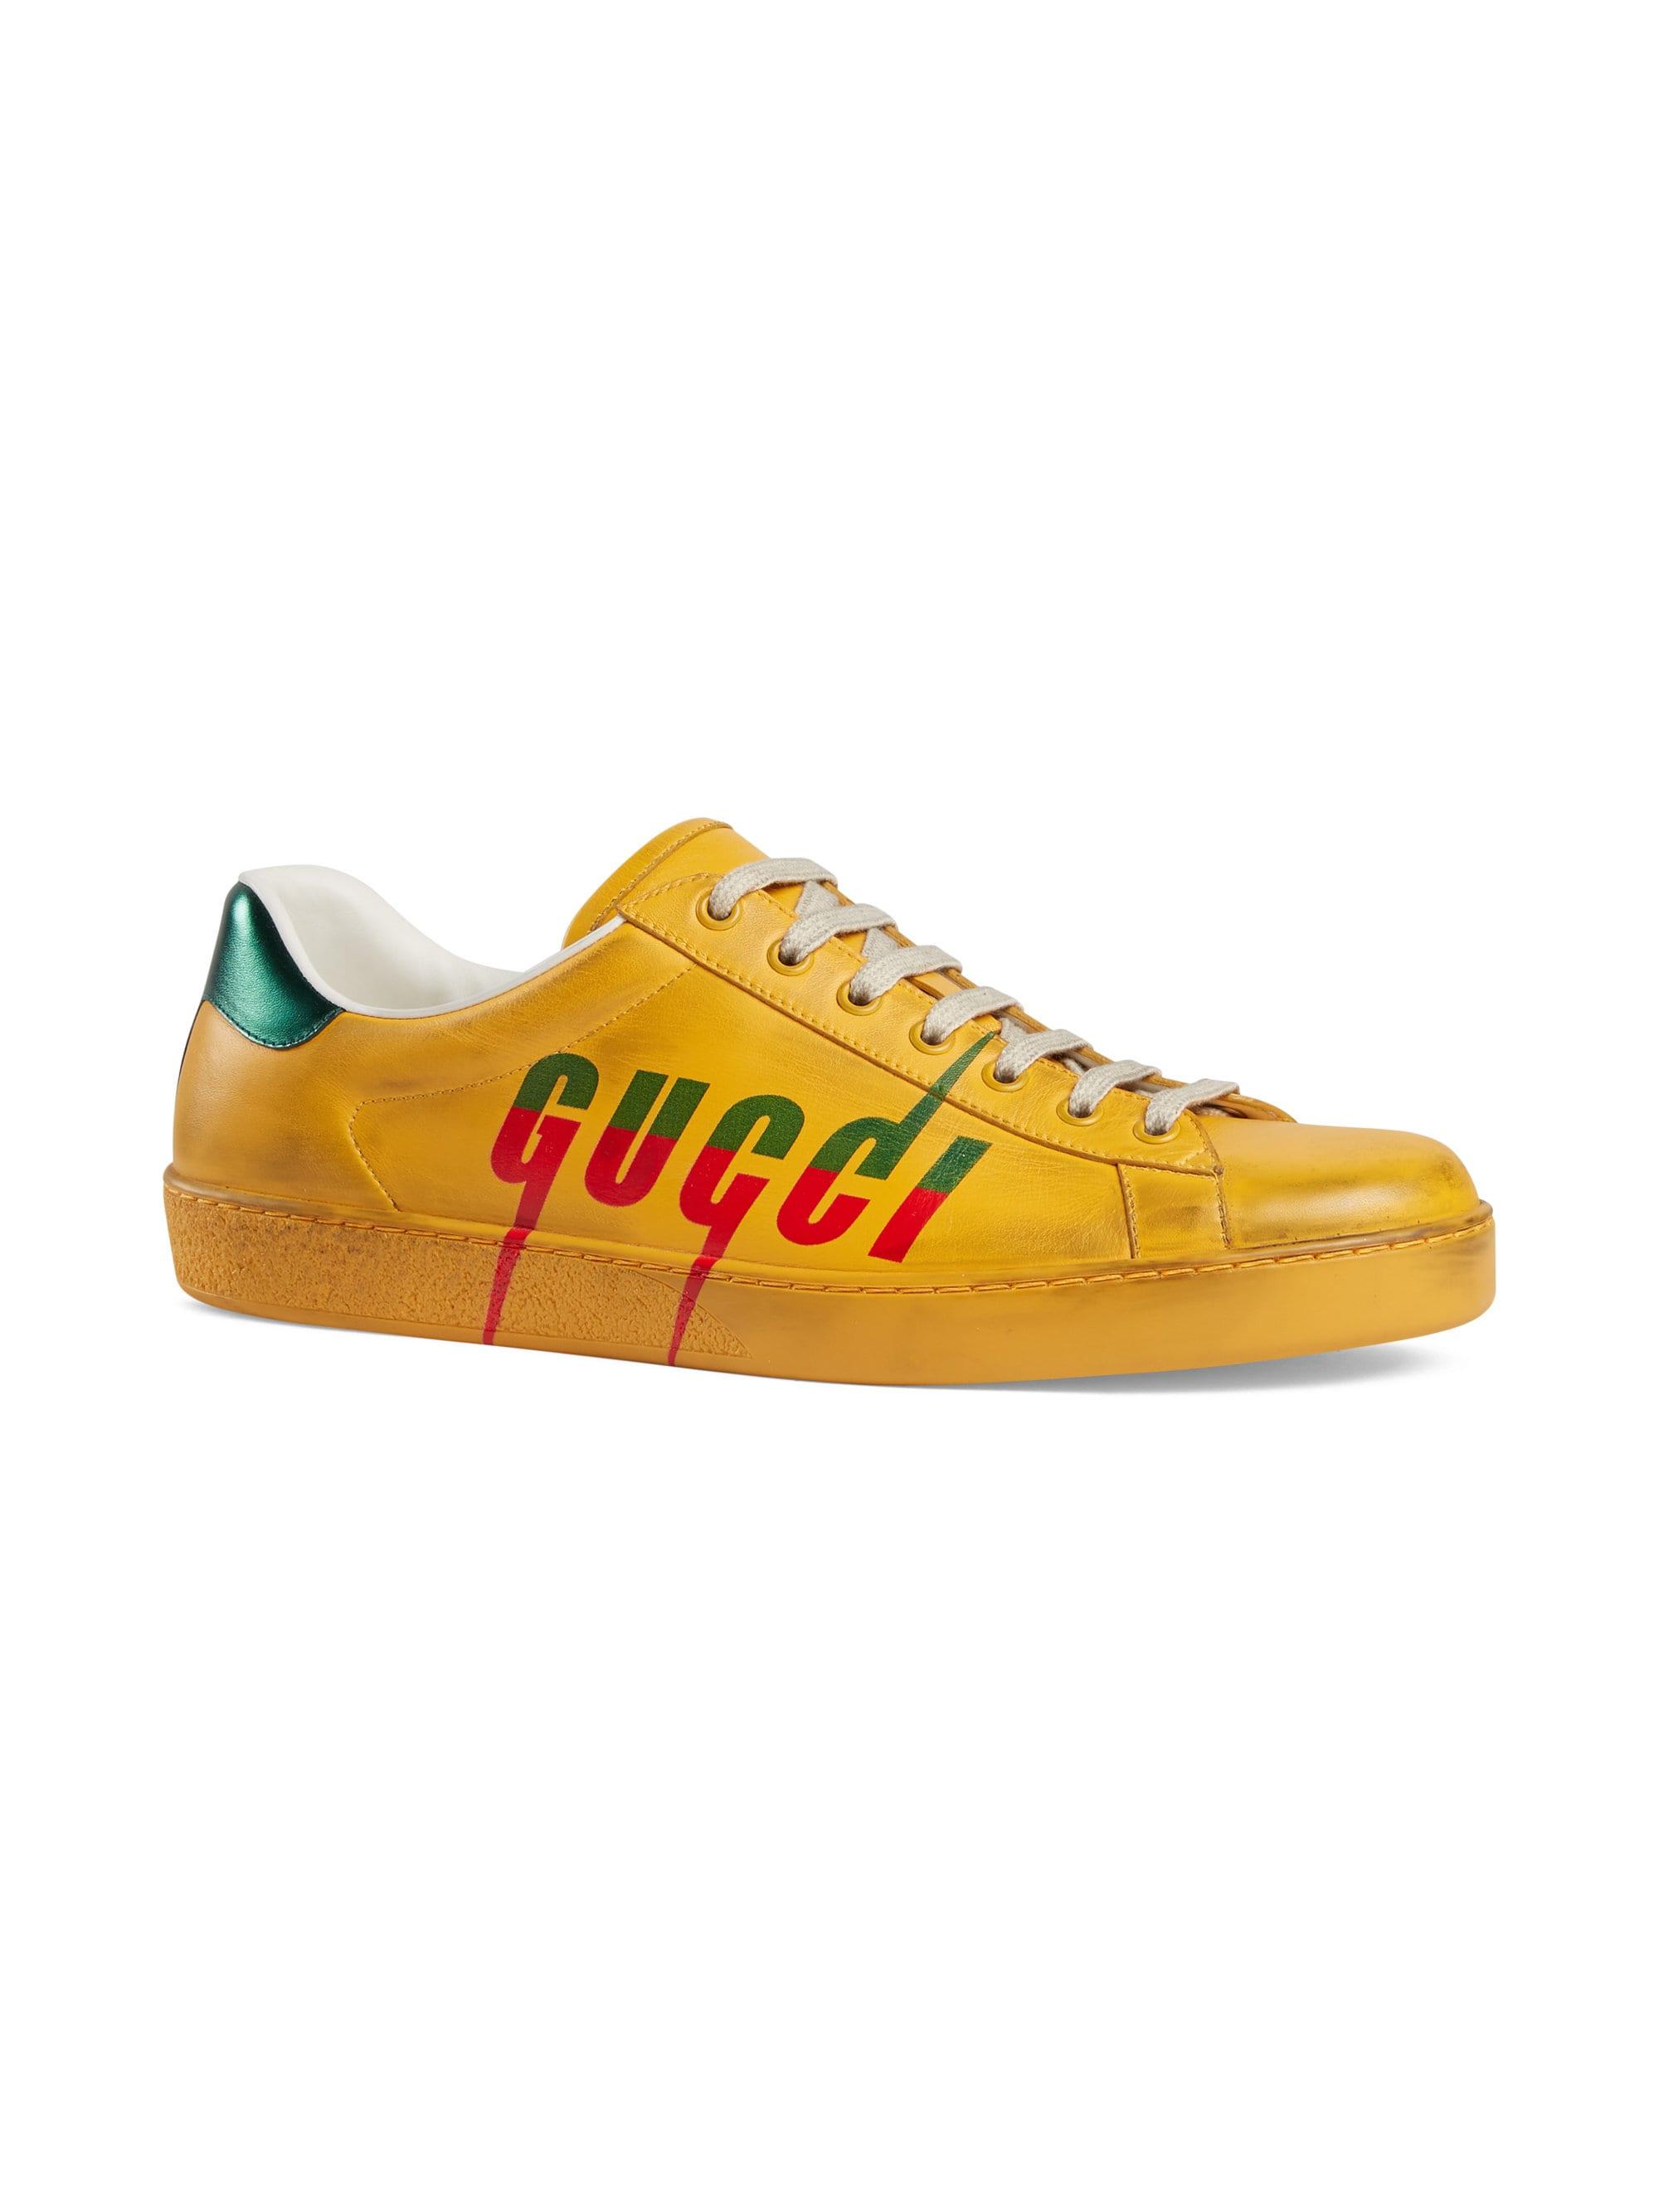 Gucci Men's New Ace New Logo Leather Sneakers - for | Lyst